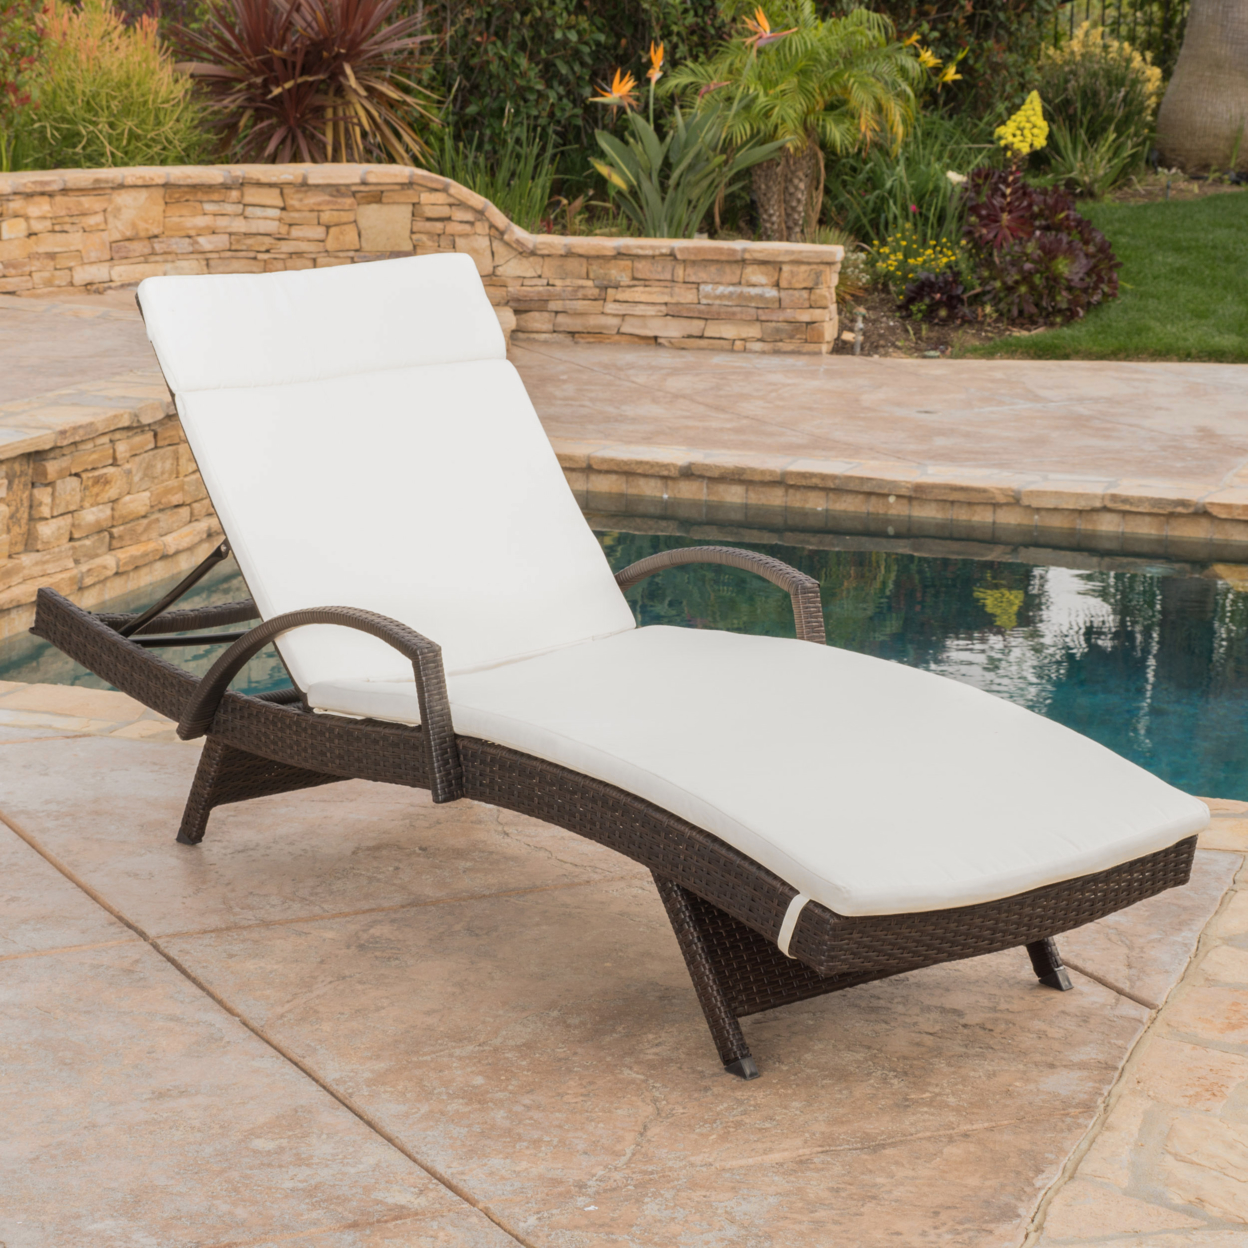 Lakeport Outdoor Adjustable Armed Chaise Lounge Chair With Cushion - Green Cushion